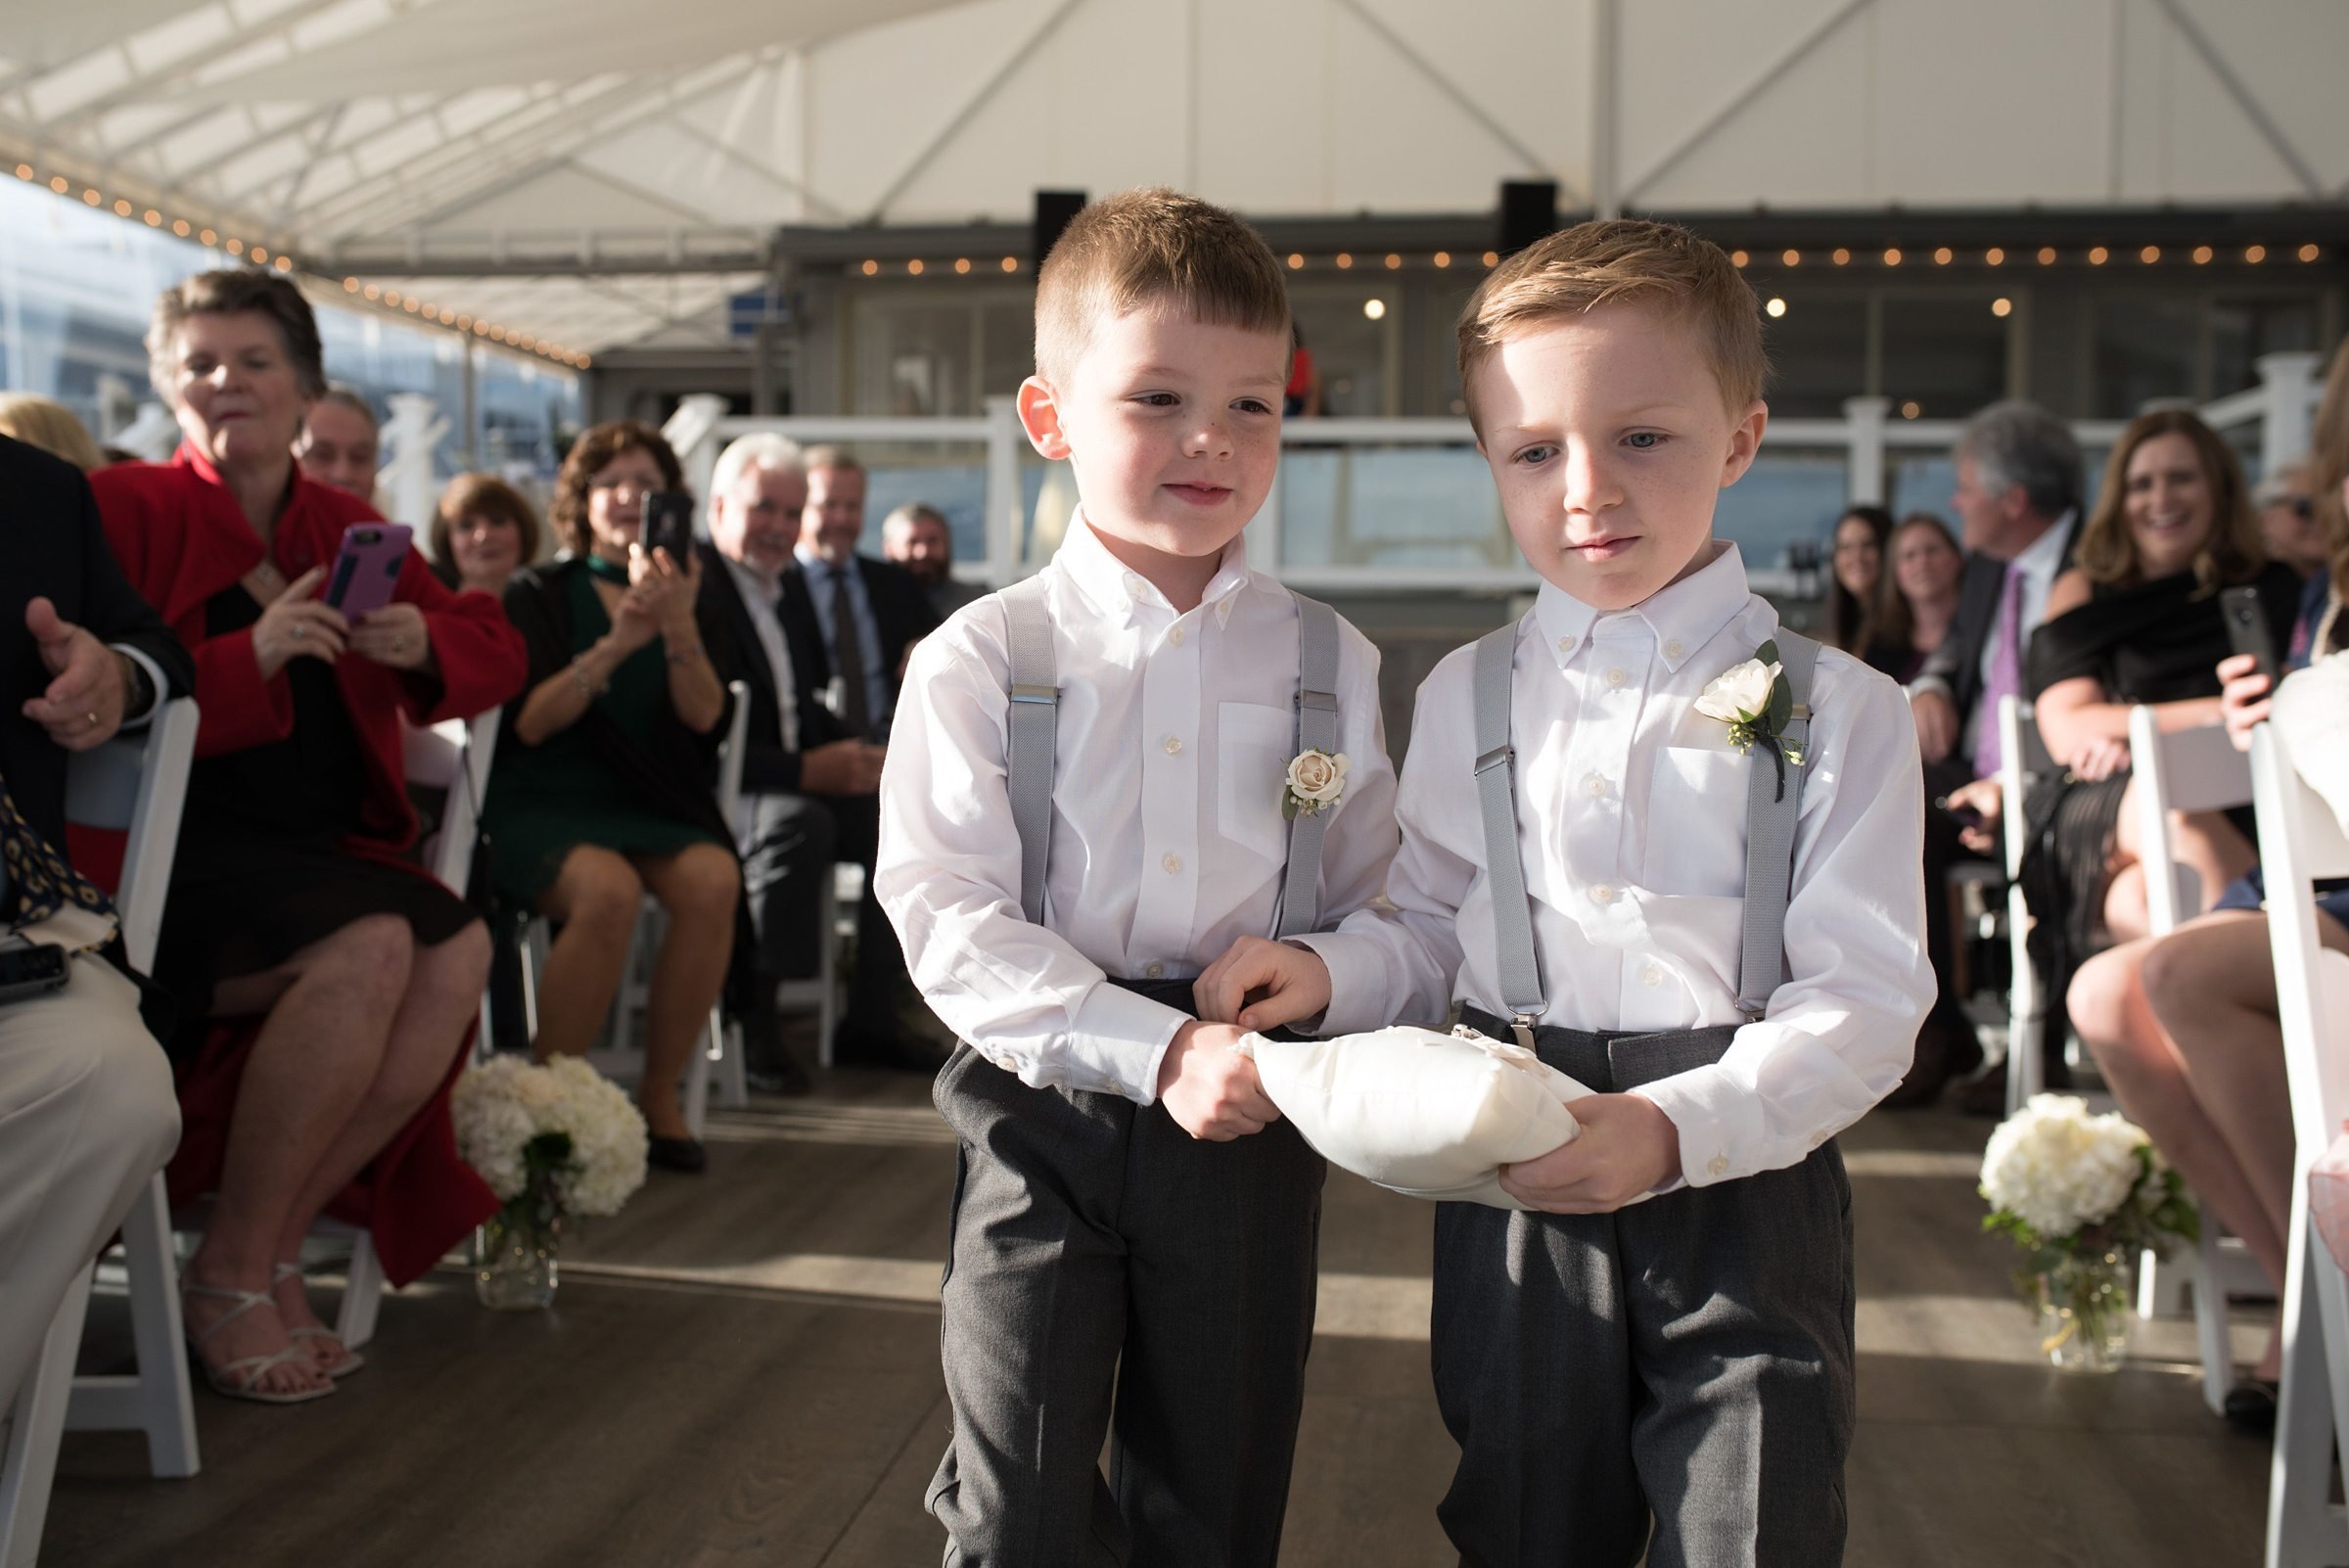 Popponesset Inn Wedding Ceremony with ring bearers walking down the aisle